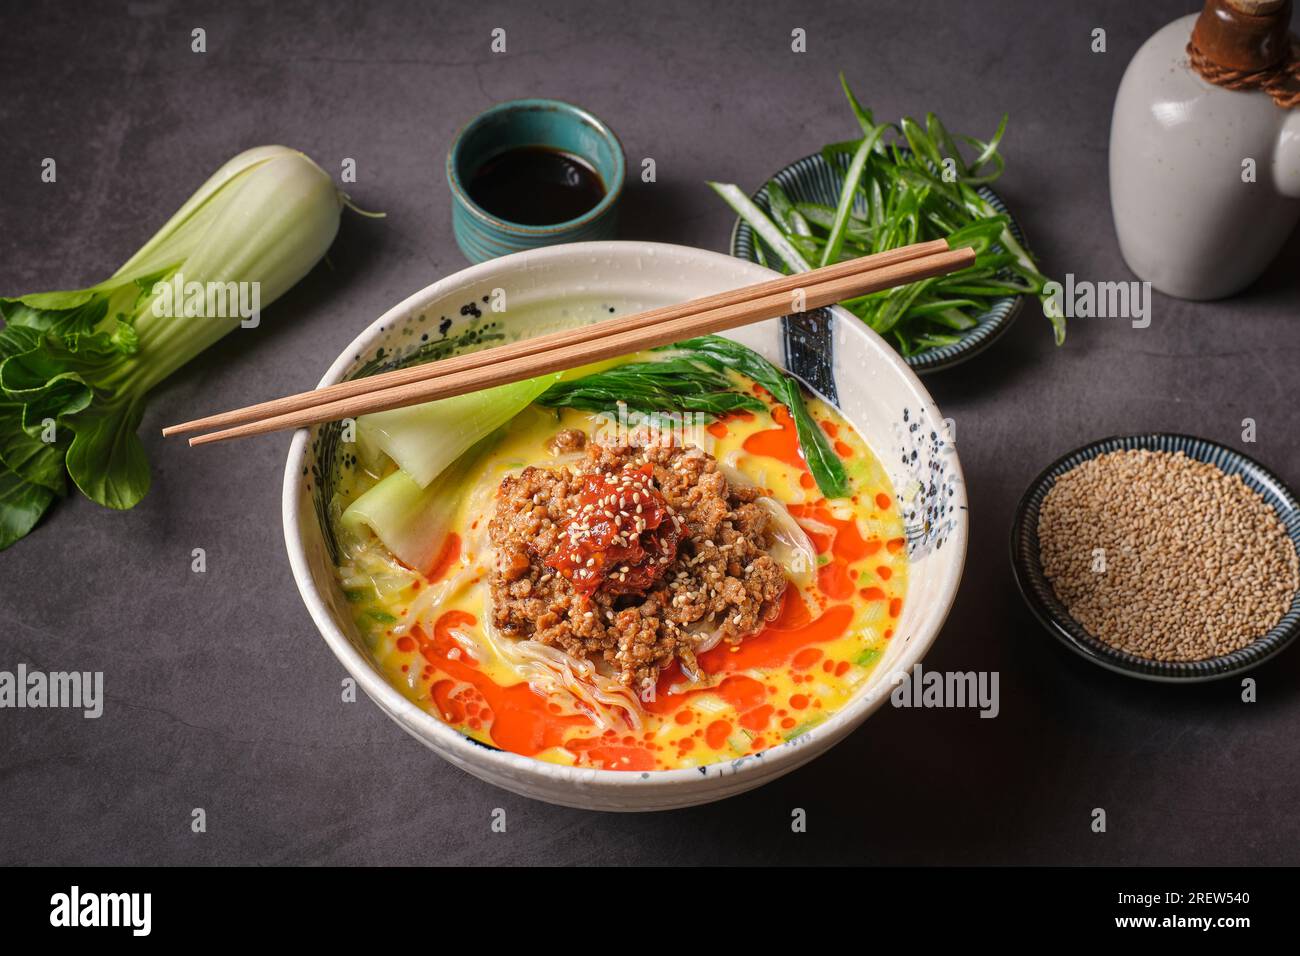 Stock photo of yummy noodles soup with minced meat isolated in grey background. Stock Photo